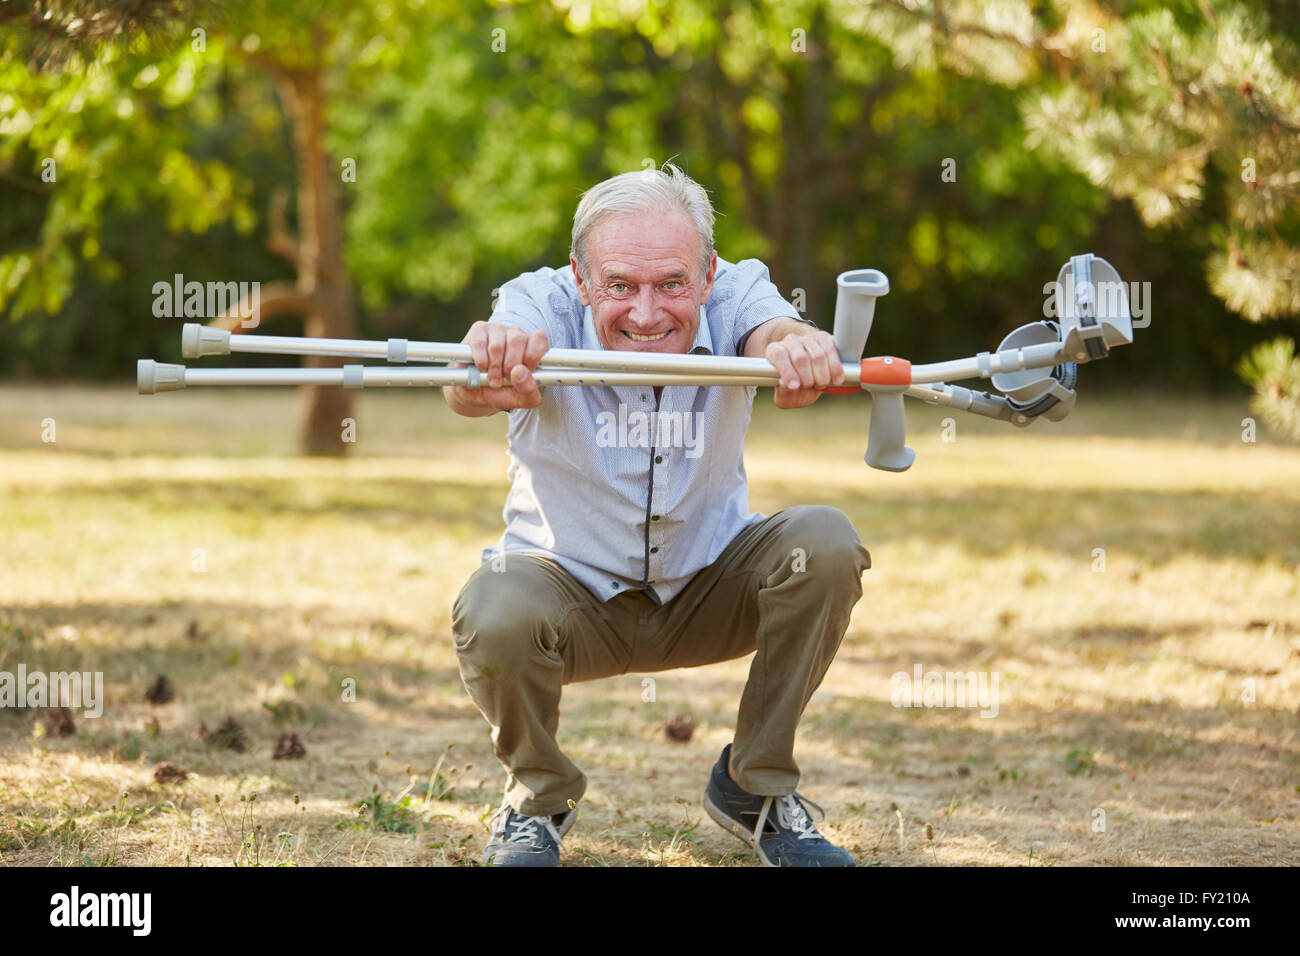 Old man with vitality and crutches in rehab having fun Stock Photo